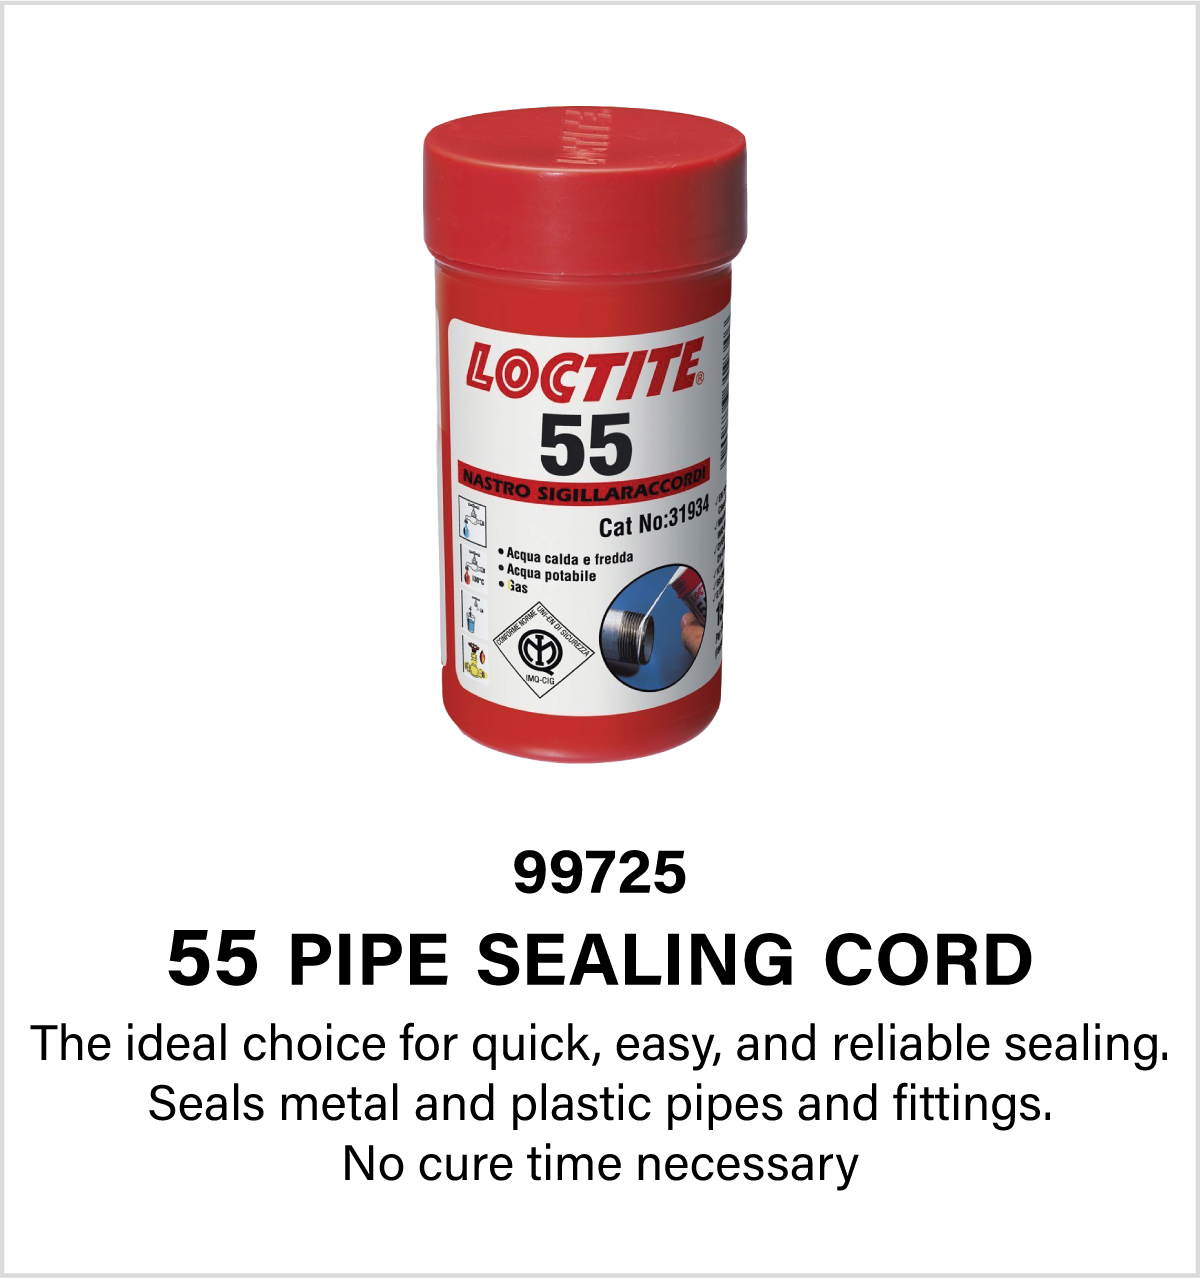 Winter Safety_Pipe Sealing Cord